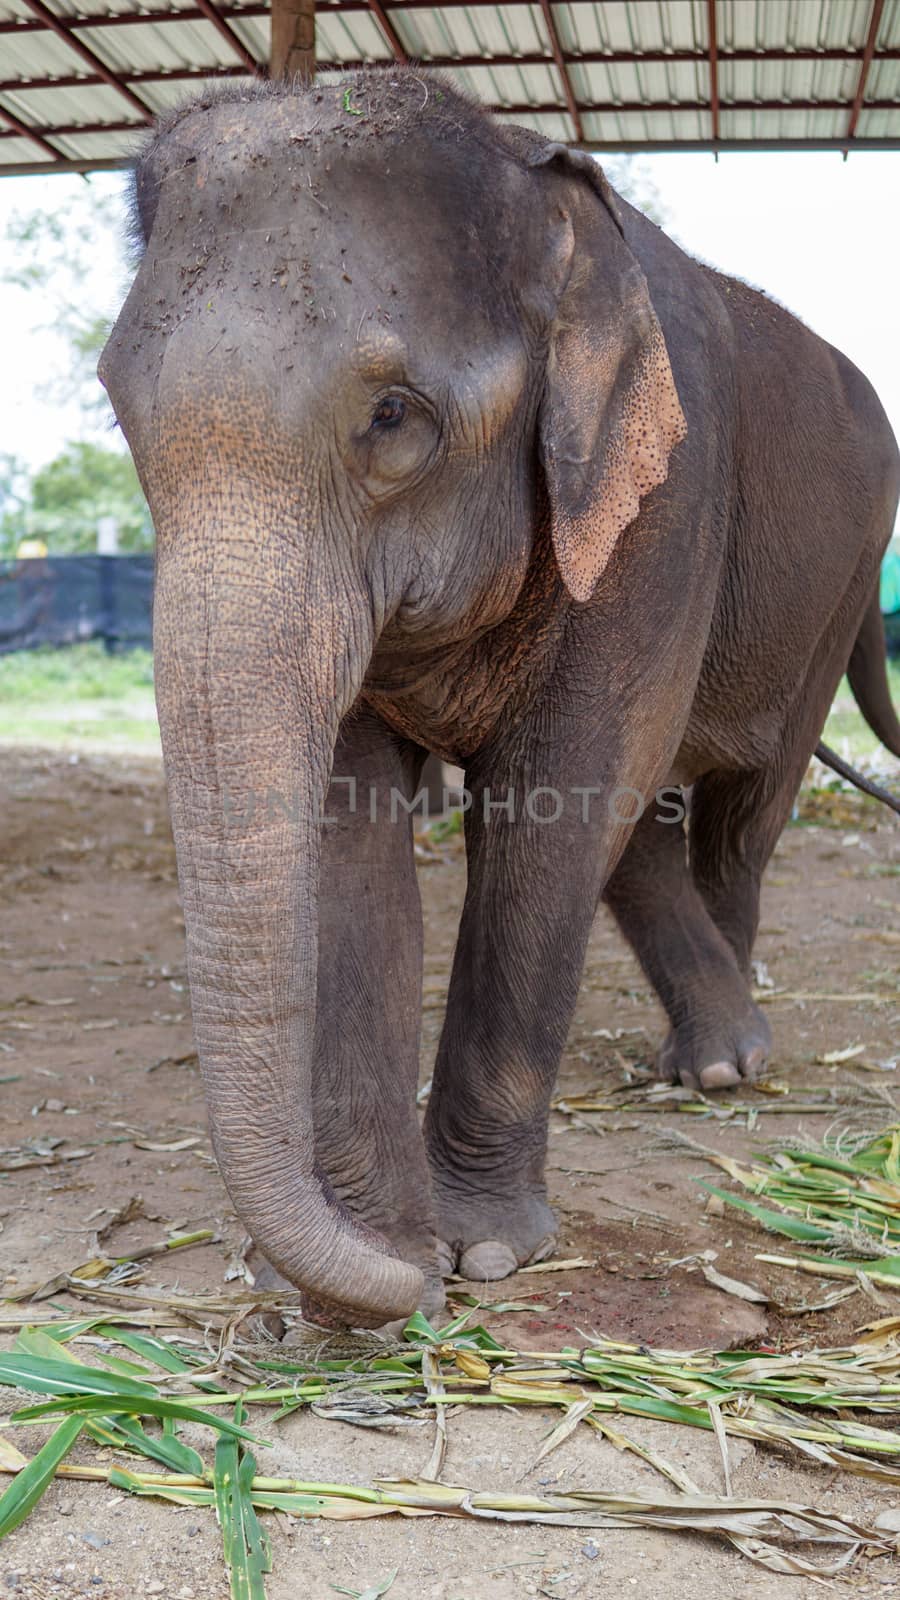 Group of adult elephants feeding sugar cane and bamboo in Elephant Care Sanctuary, Mae Tang, Chiang Mai province, Thailand.